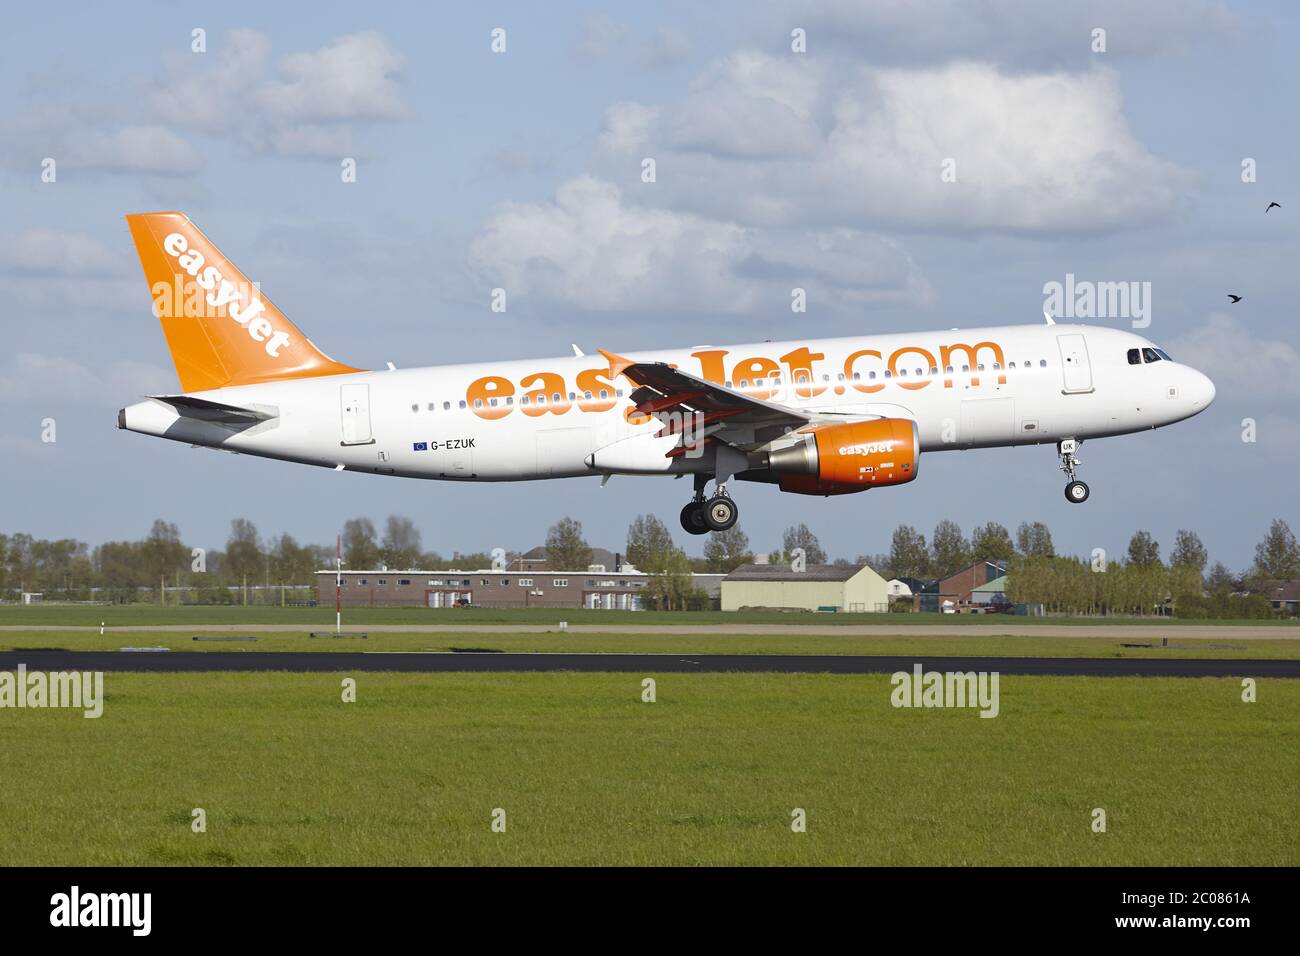 Amsterdam Schiphol Airport - EasyJet Airbus A320 lands Stock Photo